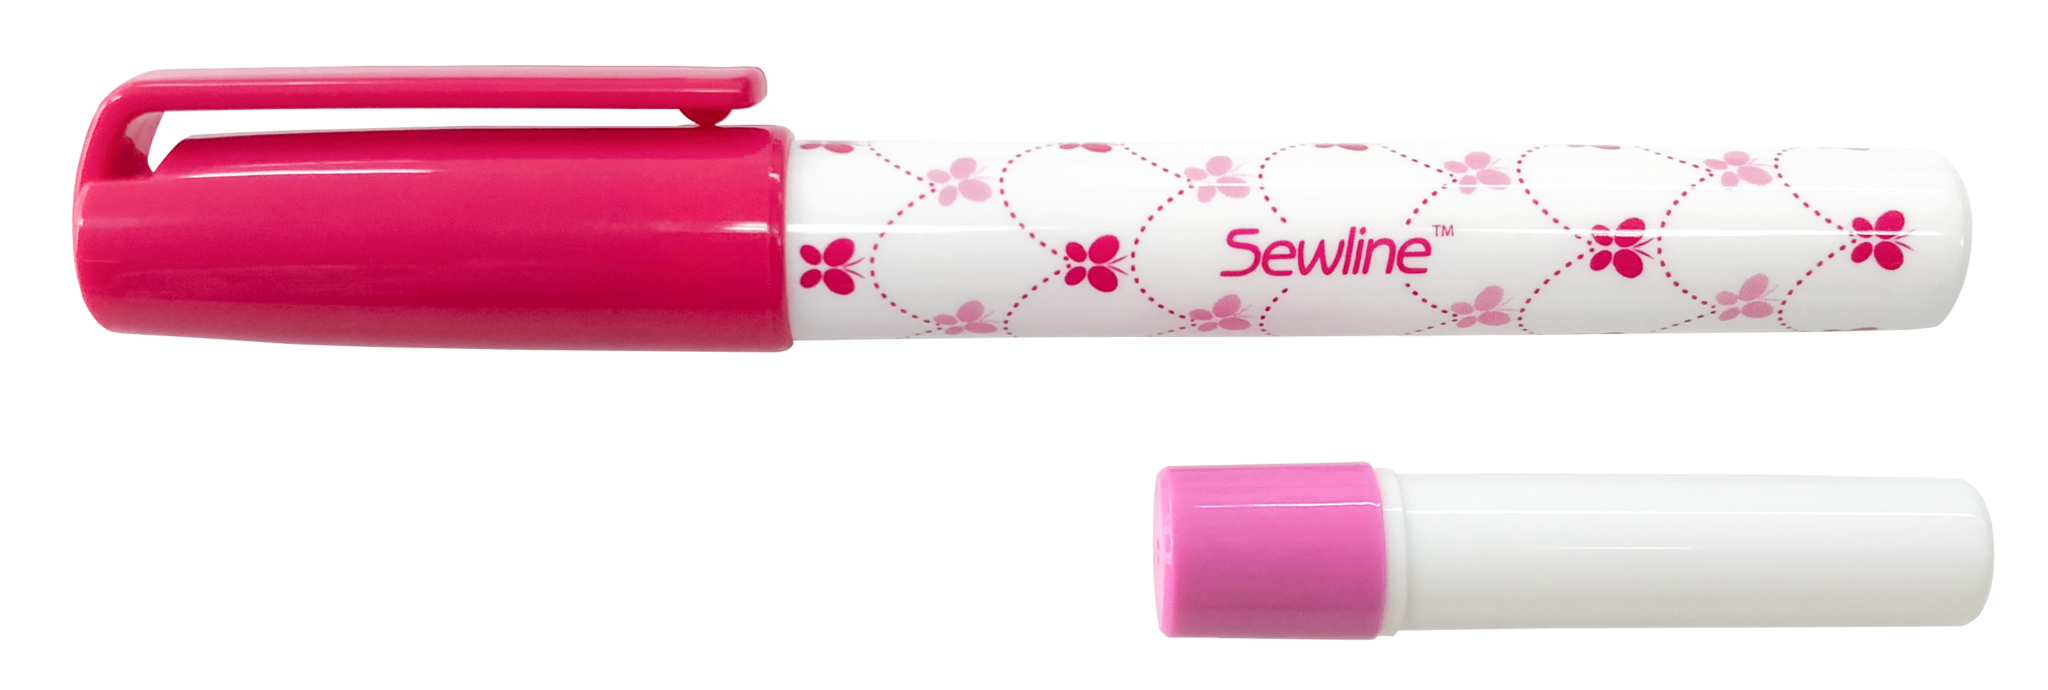 Sewline Fabric Glue Pen and Refill